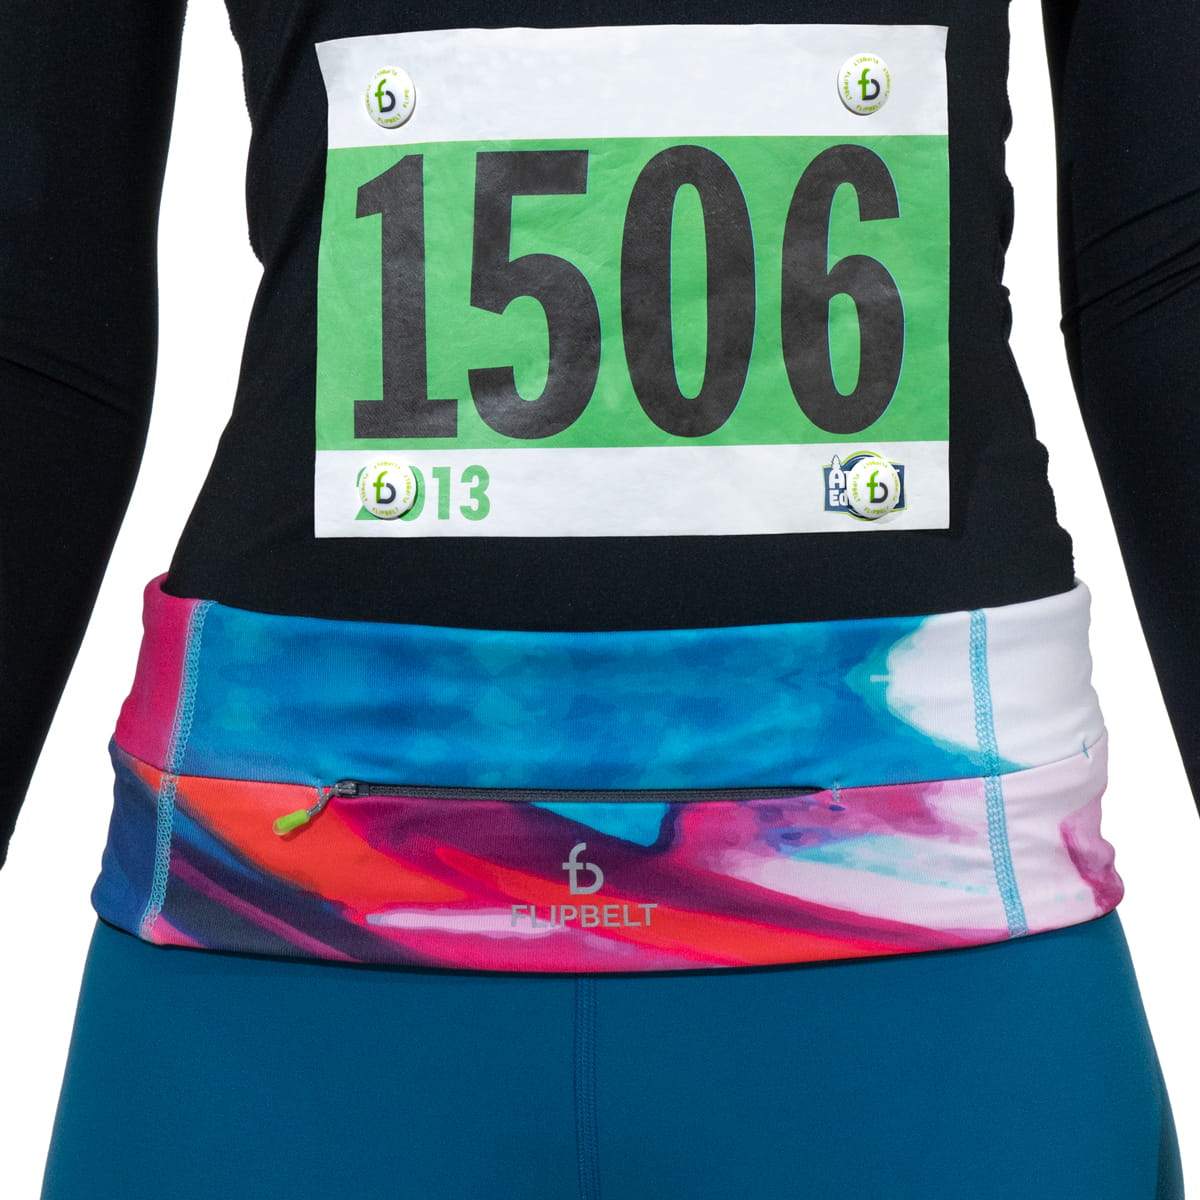 Wholesale Magnetic Race Bib Holders With Fix Clips And Belt Buckle For  Marathon, Triathlon, And Cycling Accessories From Yuanmu23, $35.71